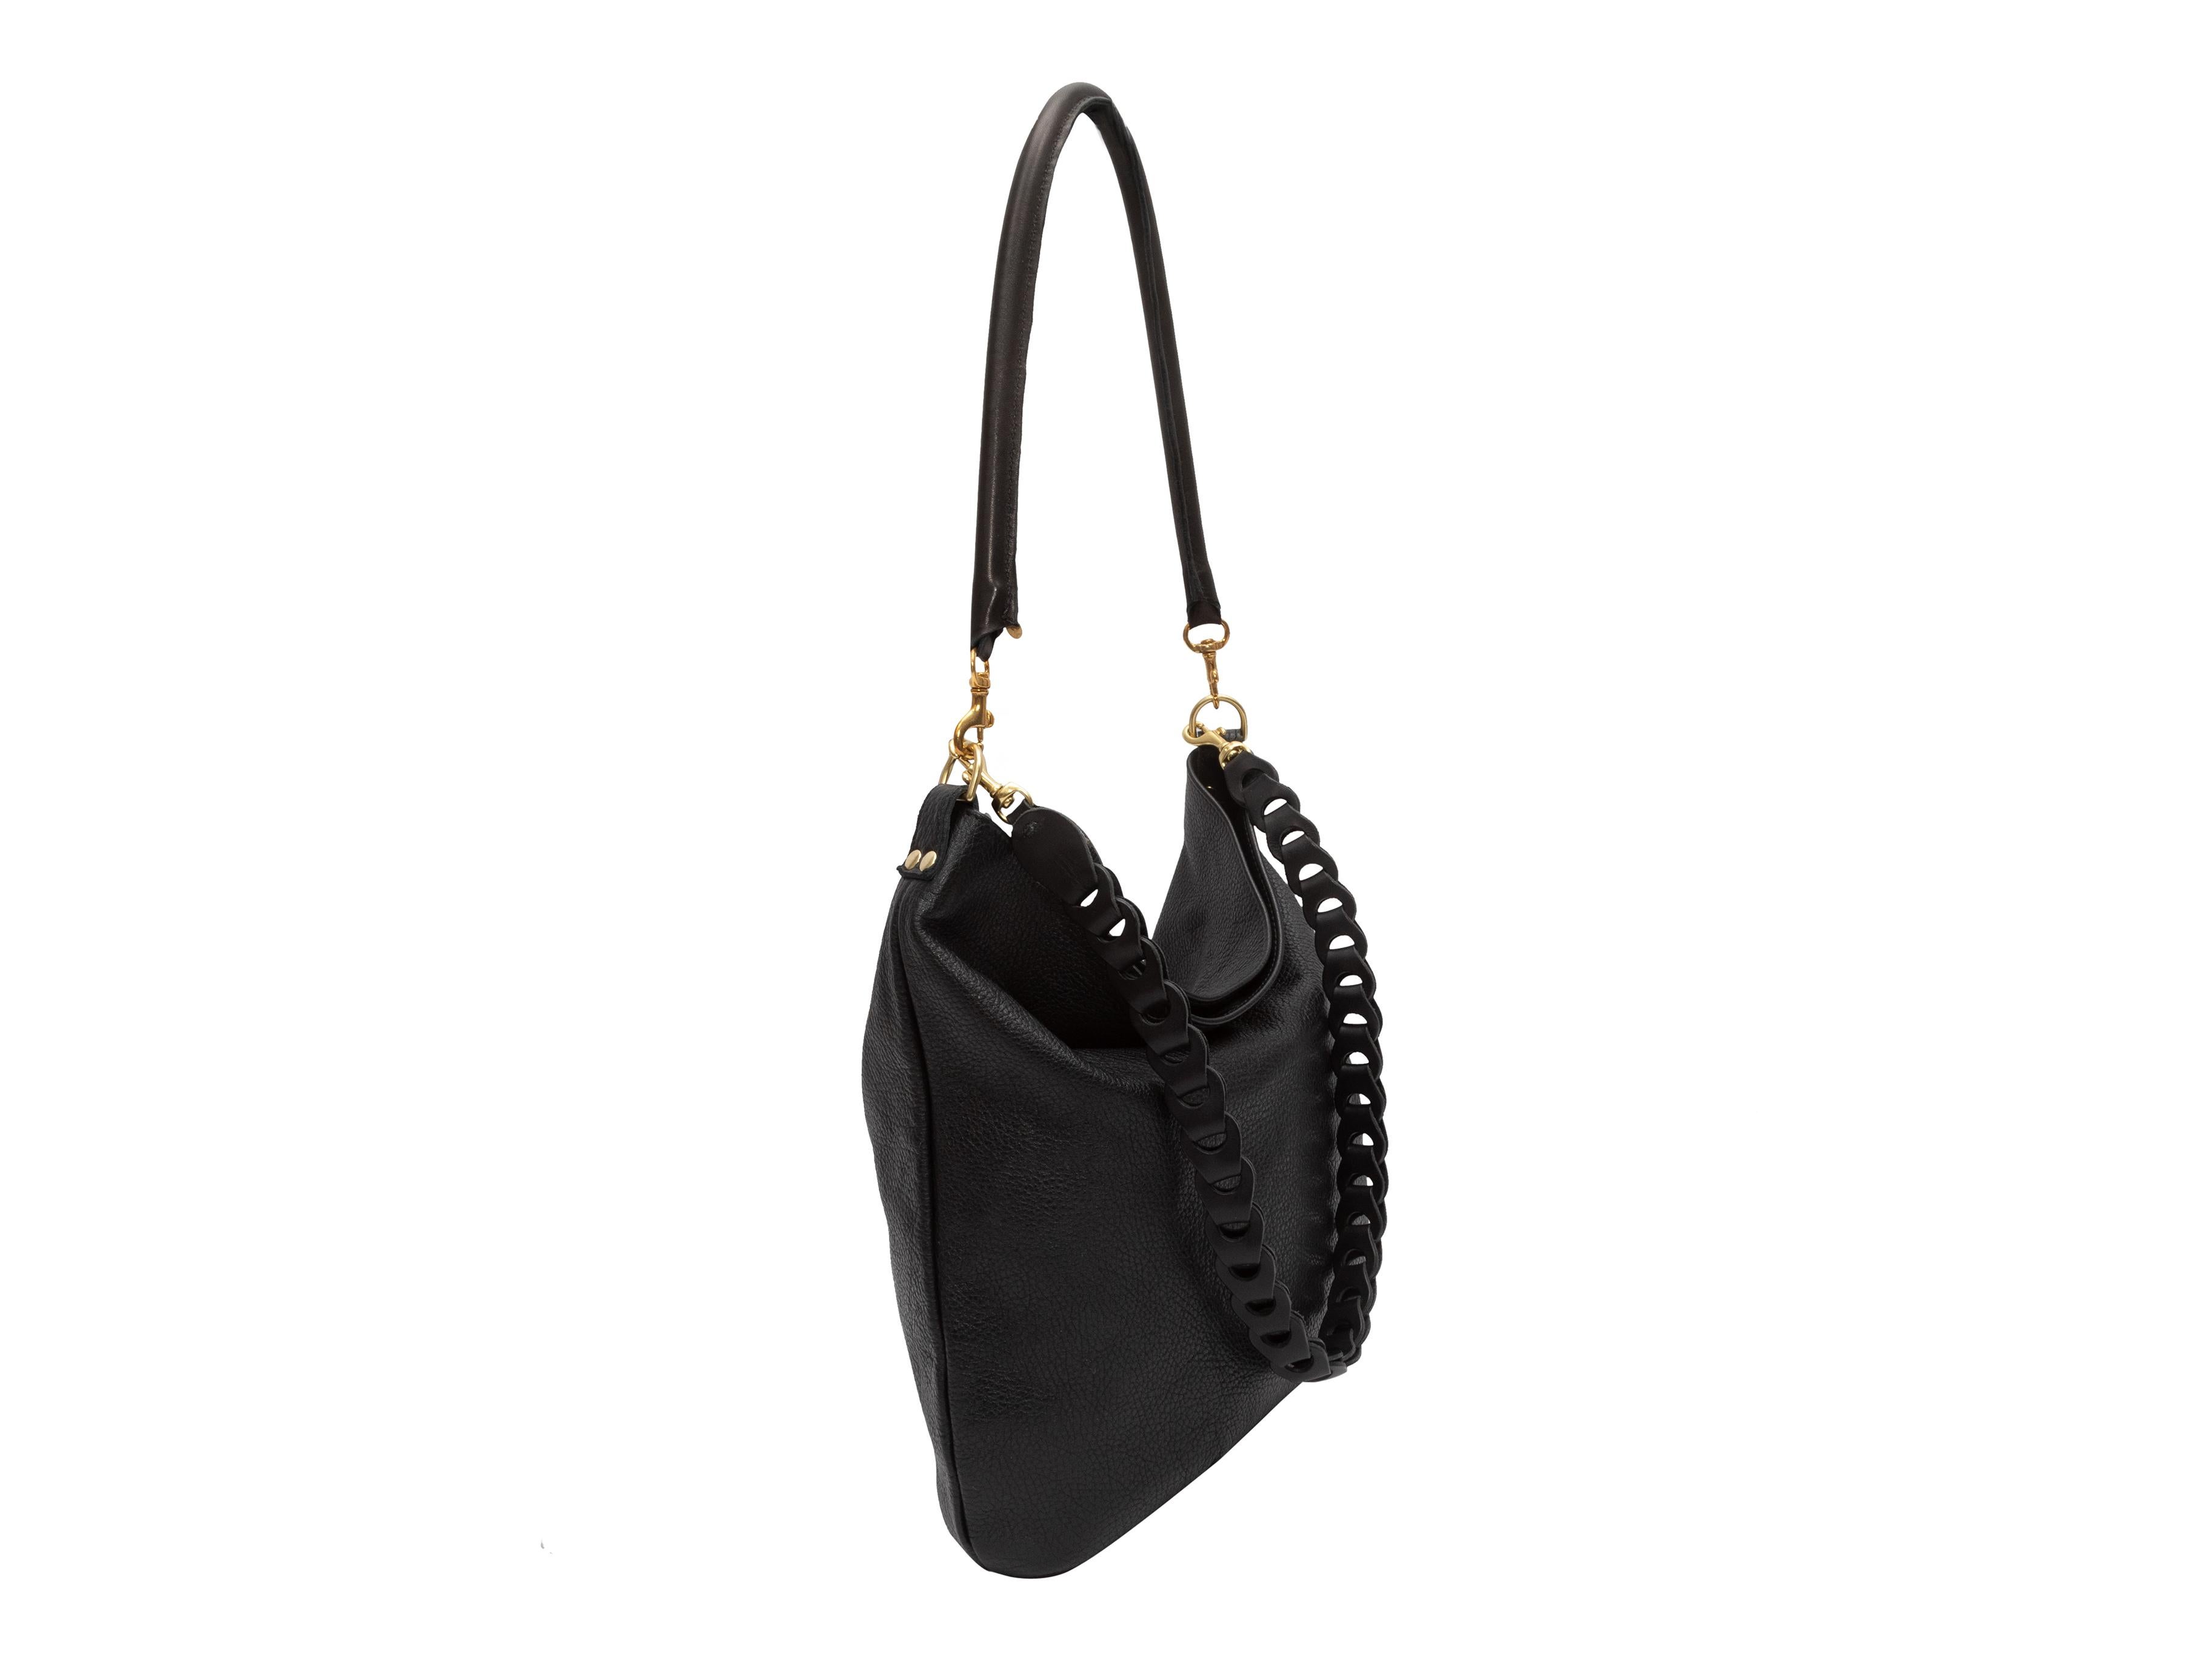 Product Details: Black Clare V. Leather Hobo Bag. This bag features a leather body, gold-tone hardware, and dual shoulder straps. 12